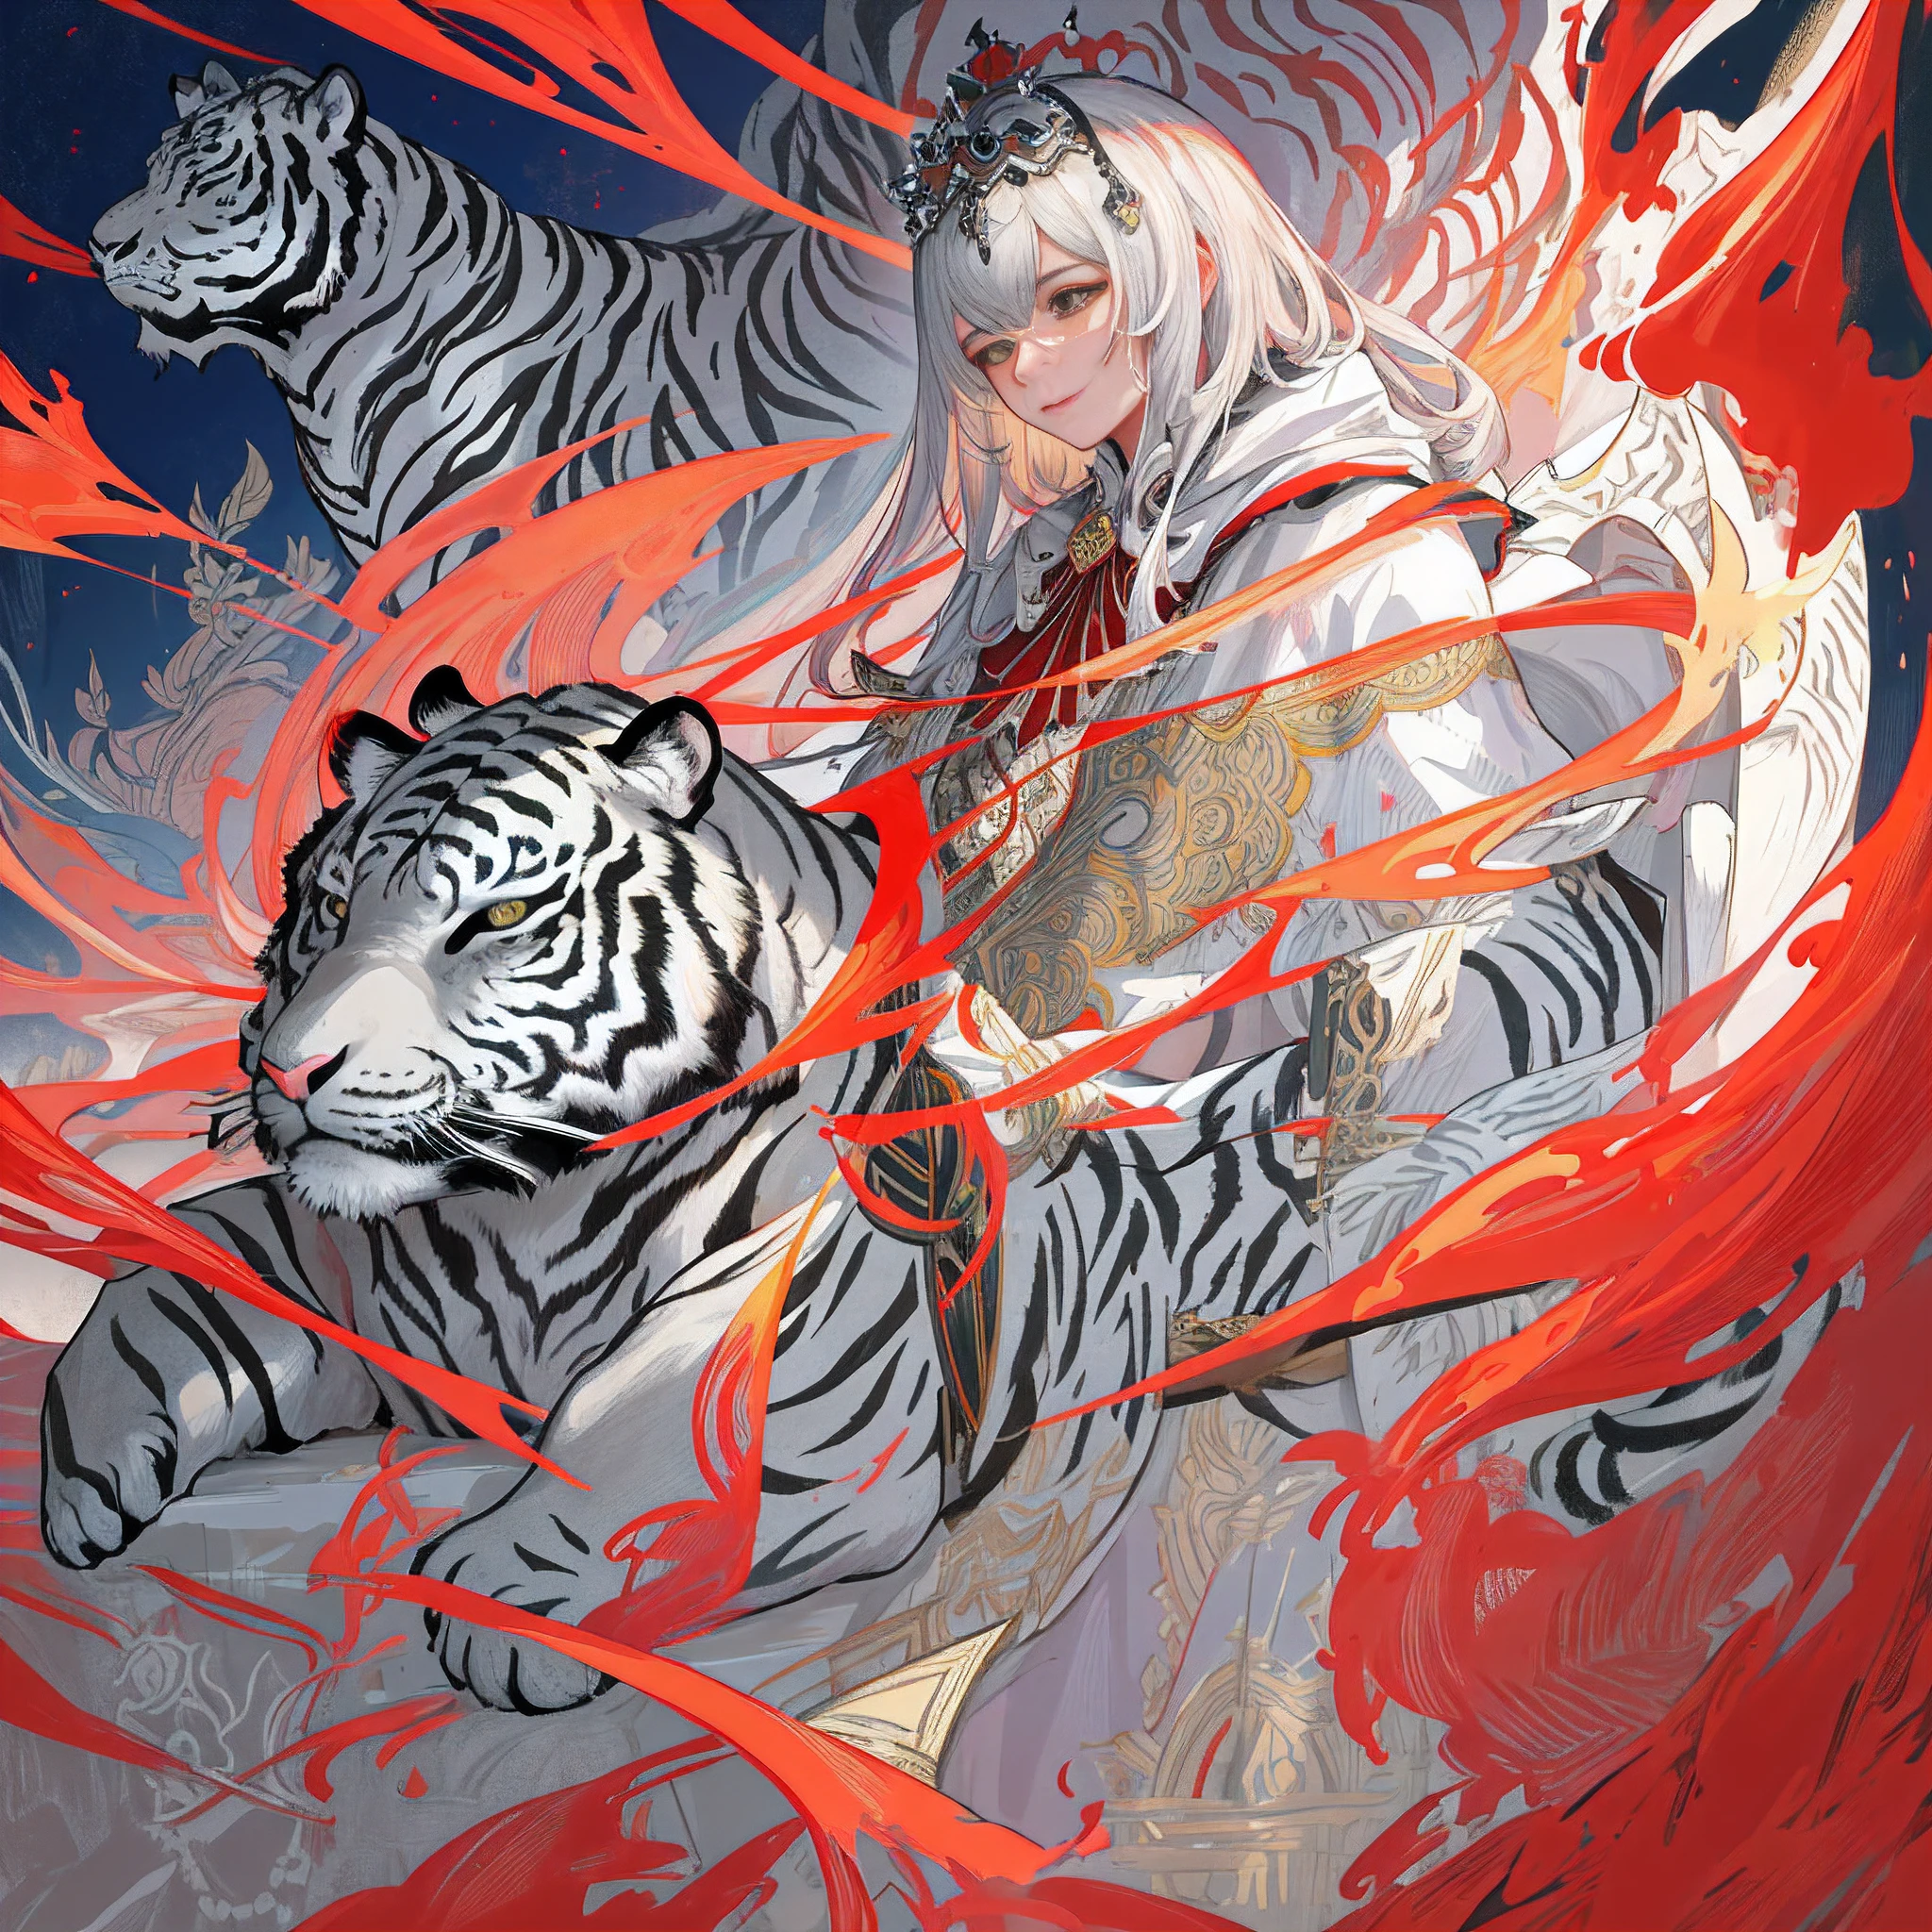 Trends on ArtStation, Trends on CGSociety, Intricate, High Detail, Sharp Focus, Dramatic, Realistic Art of Drawing by Midjourney and Greg Rutkowski, Sketch, Masterpiece, Best Quality, Very Detailed, white tiger in majestic clothes, crown, king, intricate dynamic background, depth of field, Fauvism